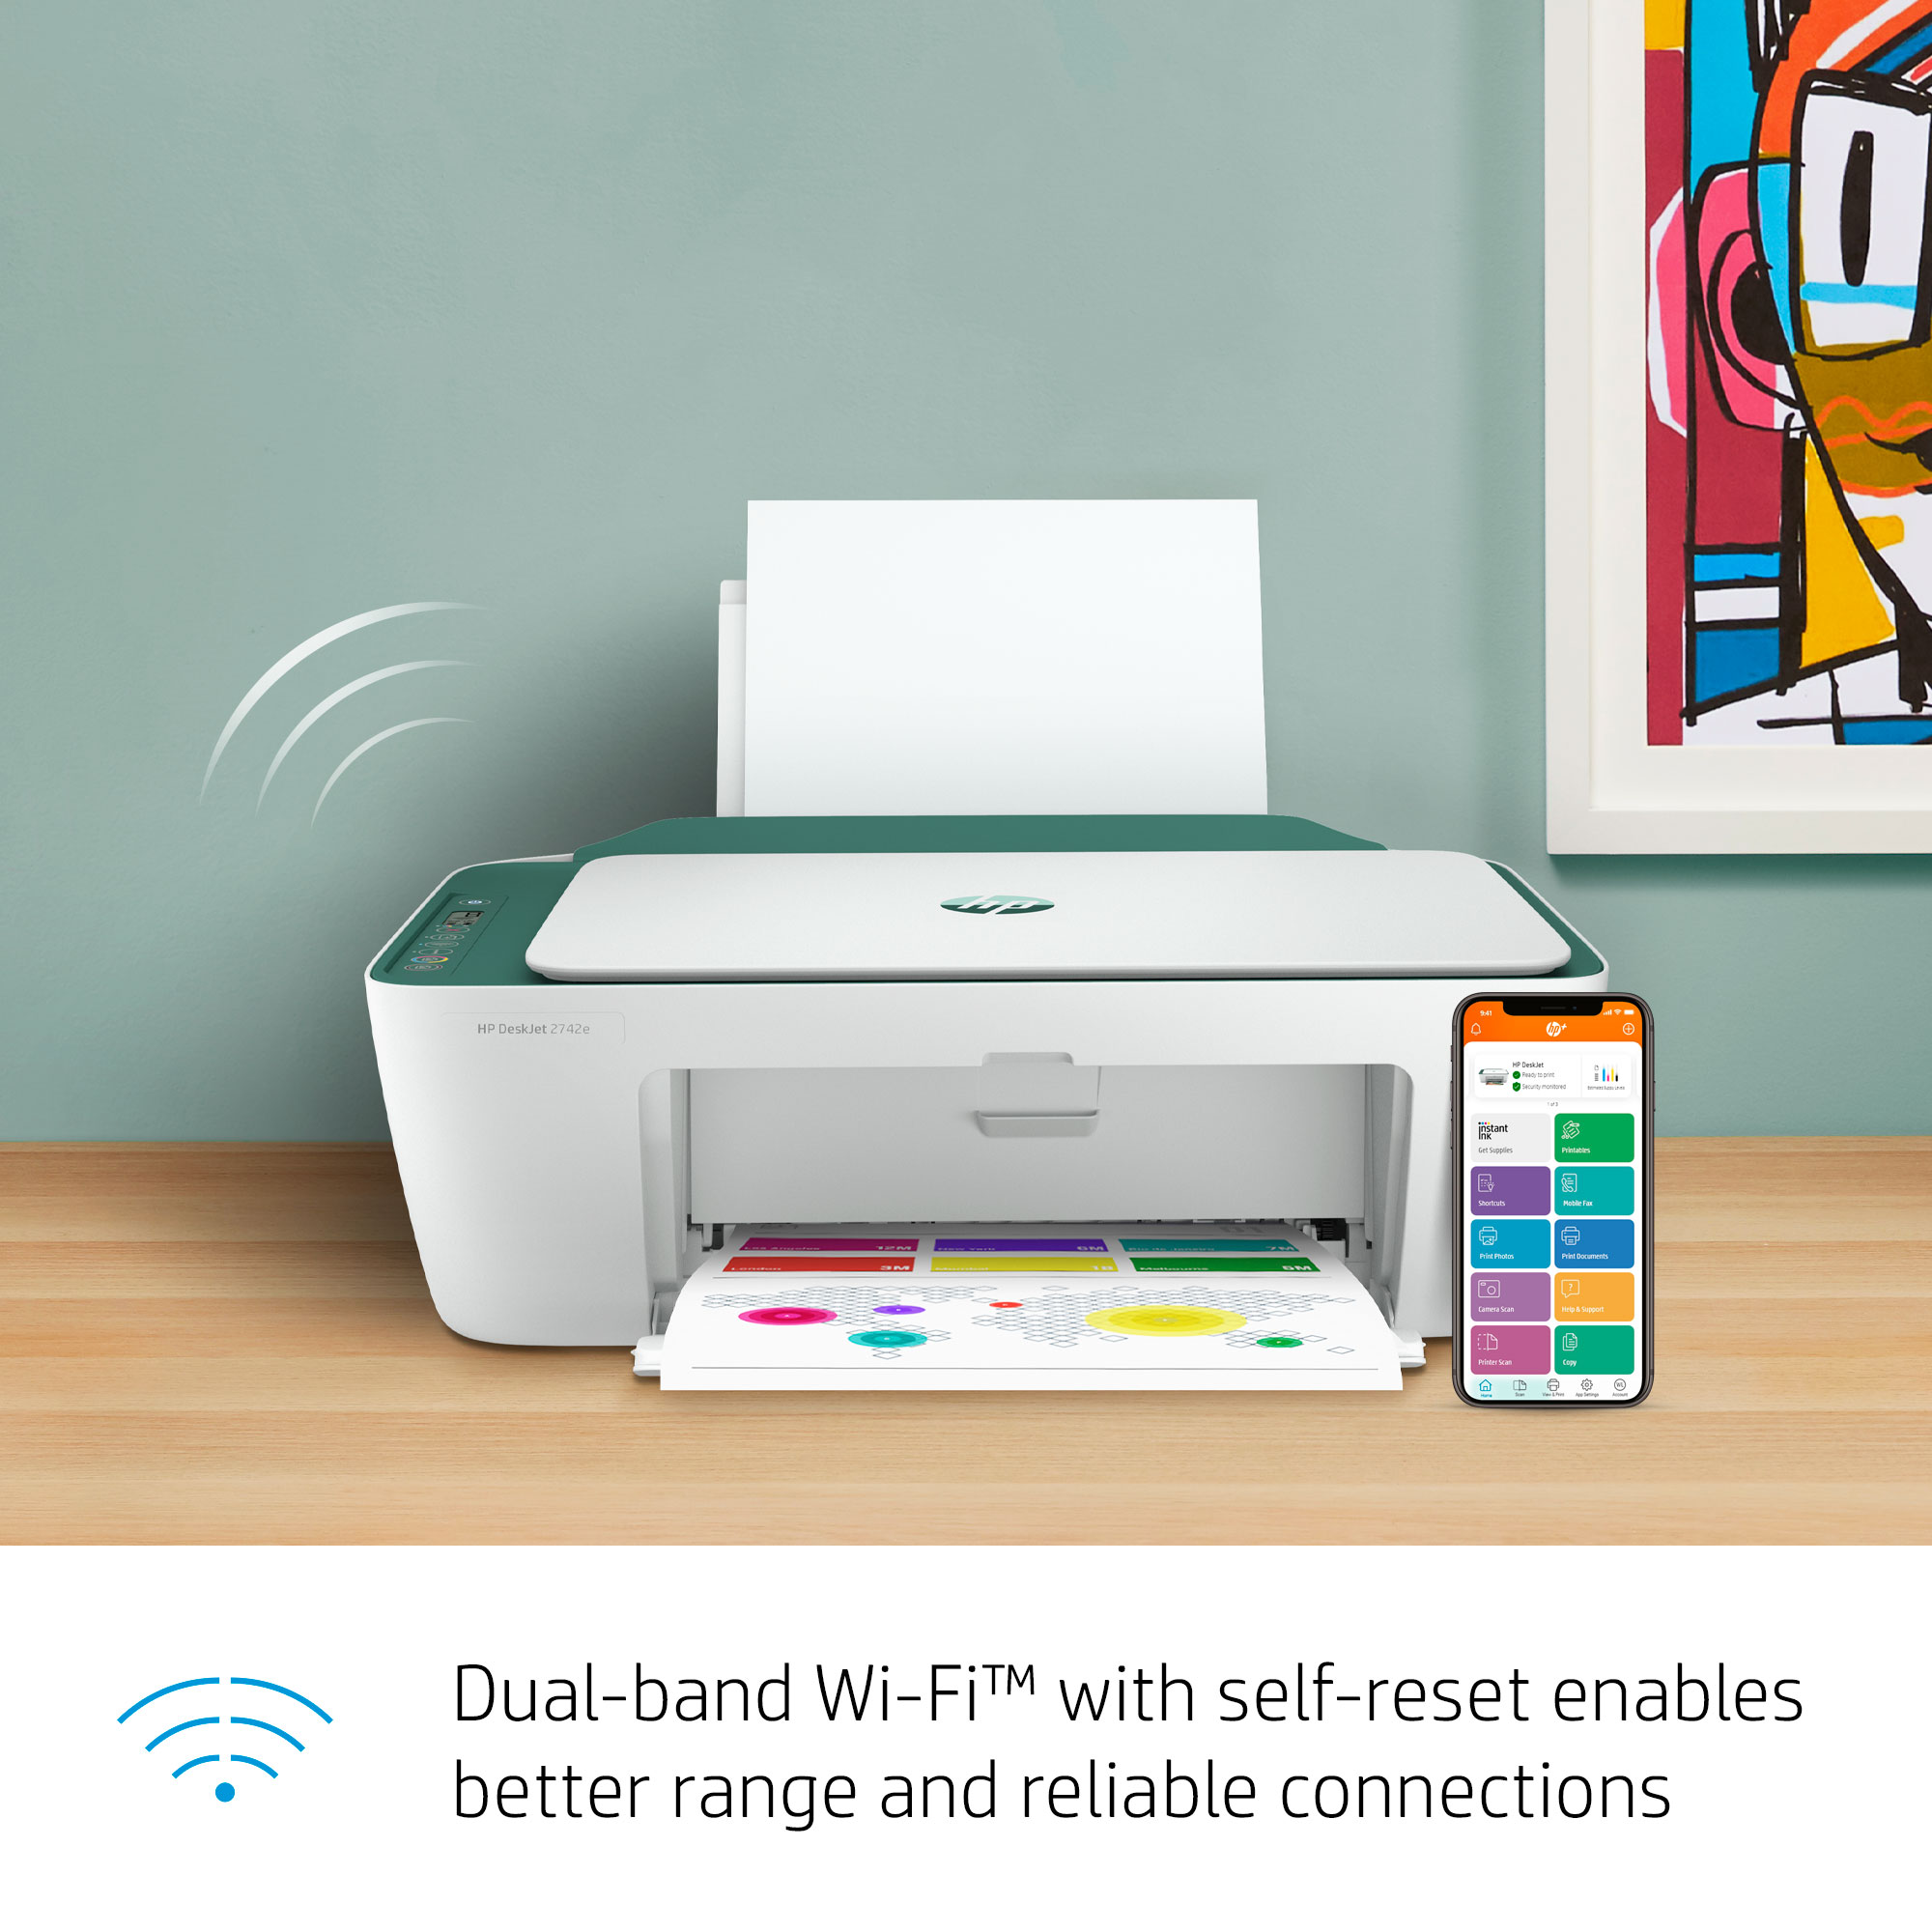 HP DeskJet 2742e All-in-One Wireless Color Inkjet Printer (Sequoia) - 6 months free Instant Ink with HP+ - image 5 of 10